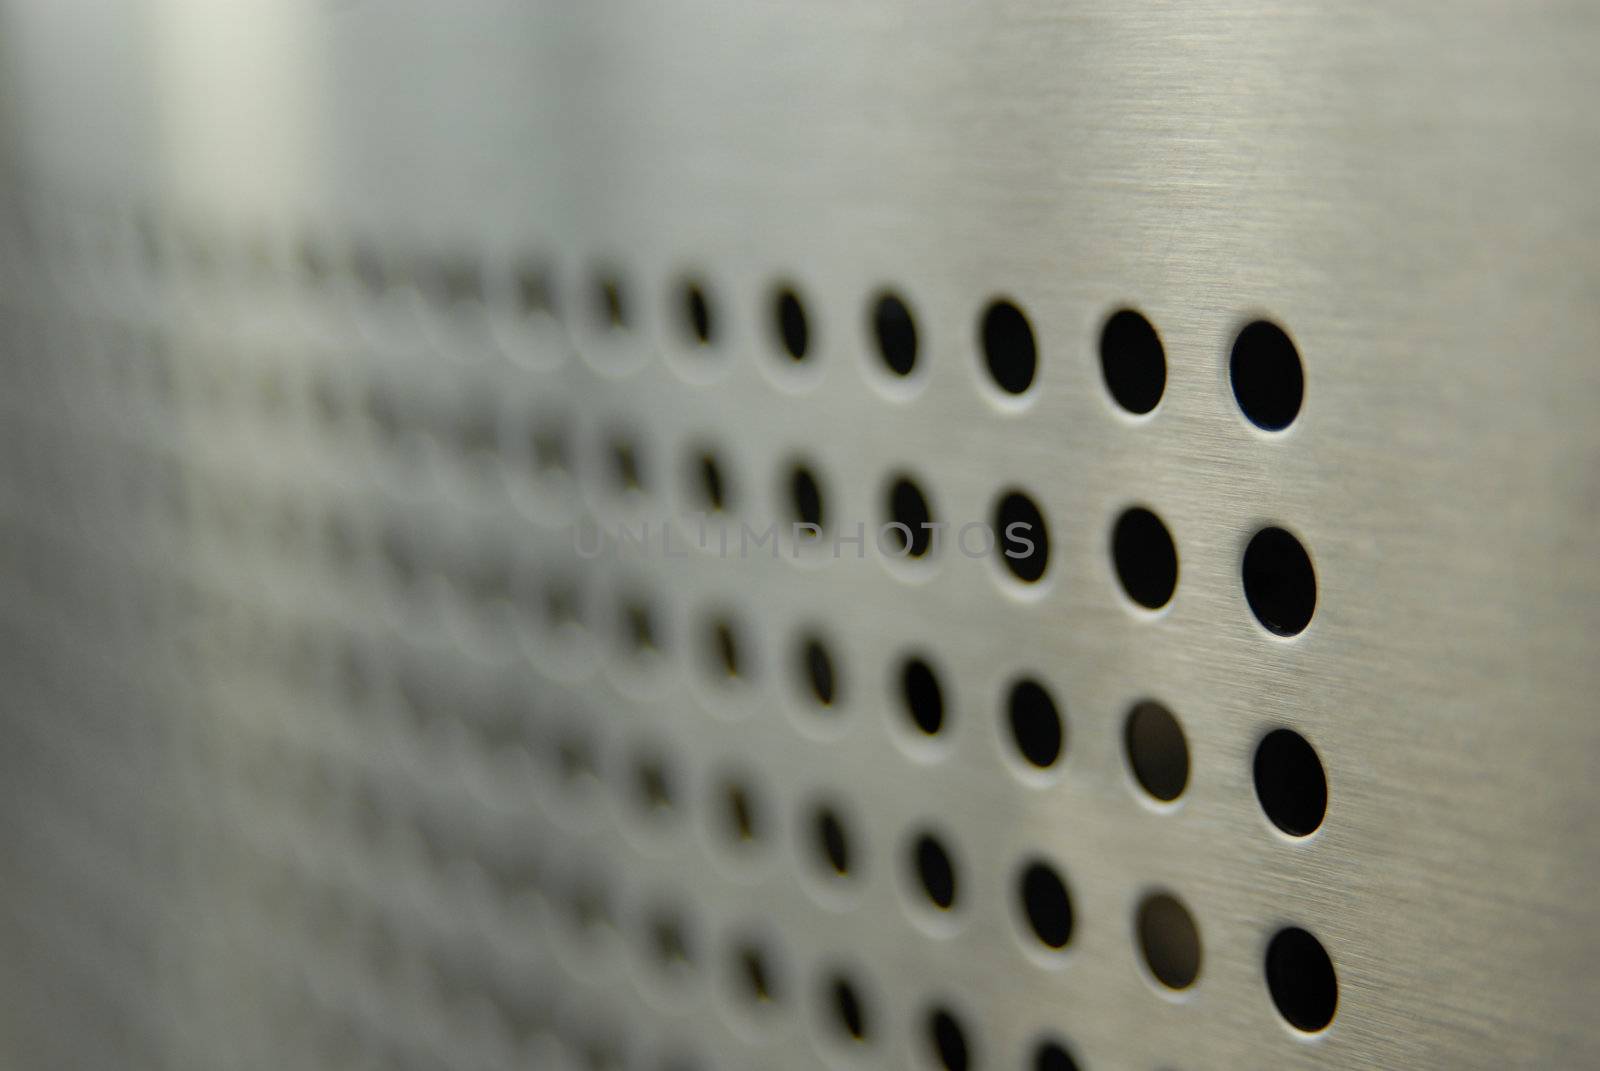 Aligned perforations on metallic surface